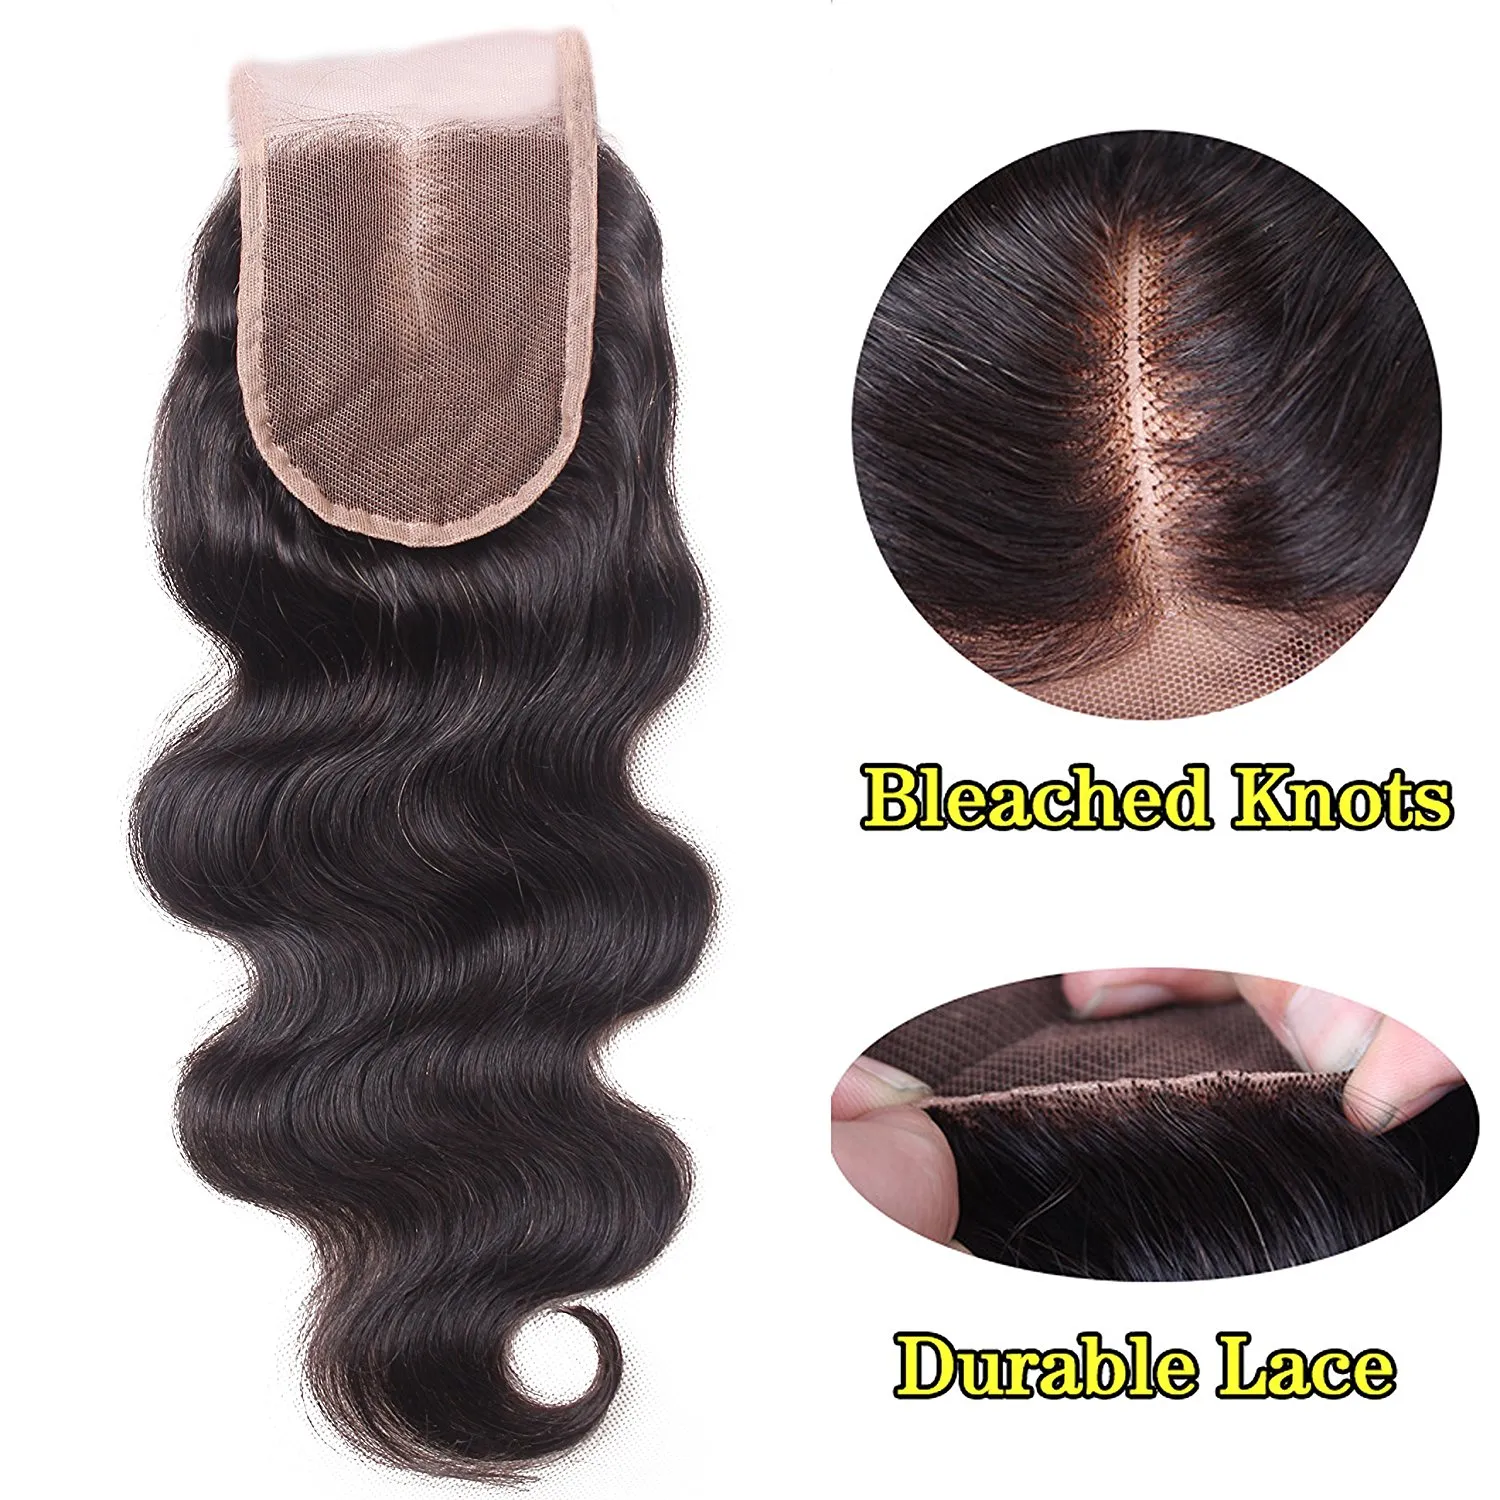 4x4 Lace Closure Malaysian Body Wave Human Hair Closure Free Middle 3 Part Lace Closure Bleached Knots Human Hair Products